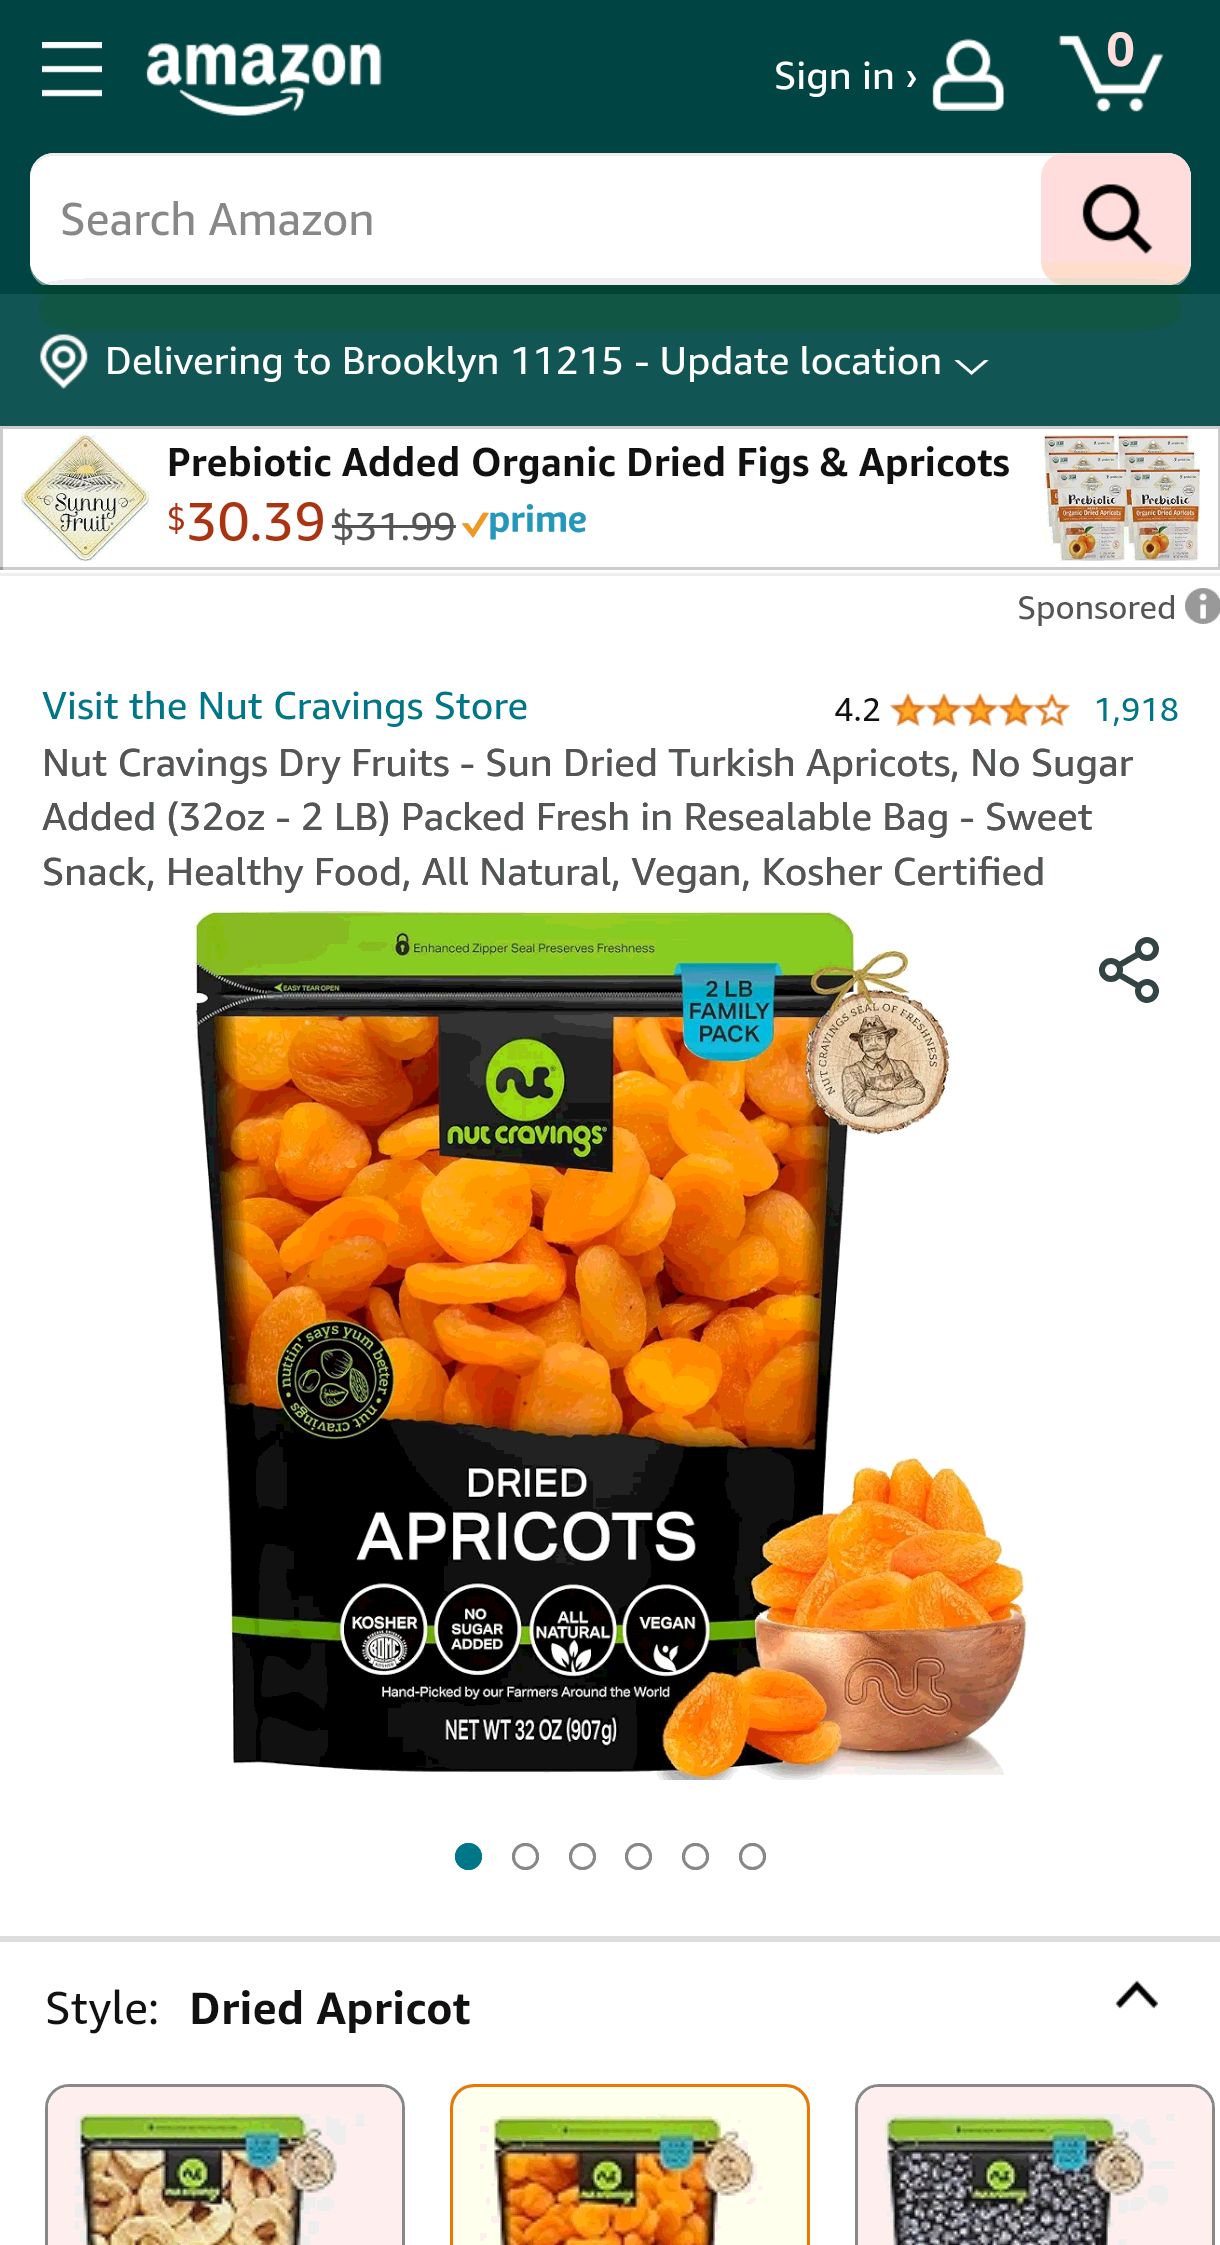 Nut Cravings Dry Fruits - Sun Dried Turkish Apricots, No Sugar Added (32oz - 2 LB) Packed Fresh in Resealable Bag - Sweet Snack, Healthy Food, All Natural, Vegan, Kosher Certified : Grocery & Gourmet 